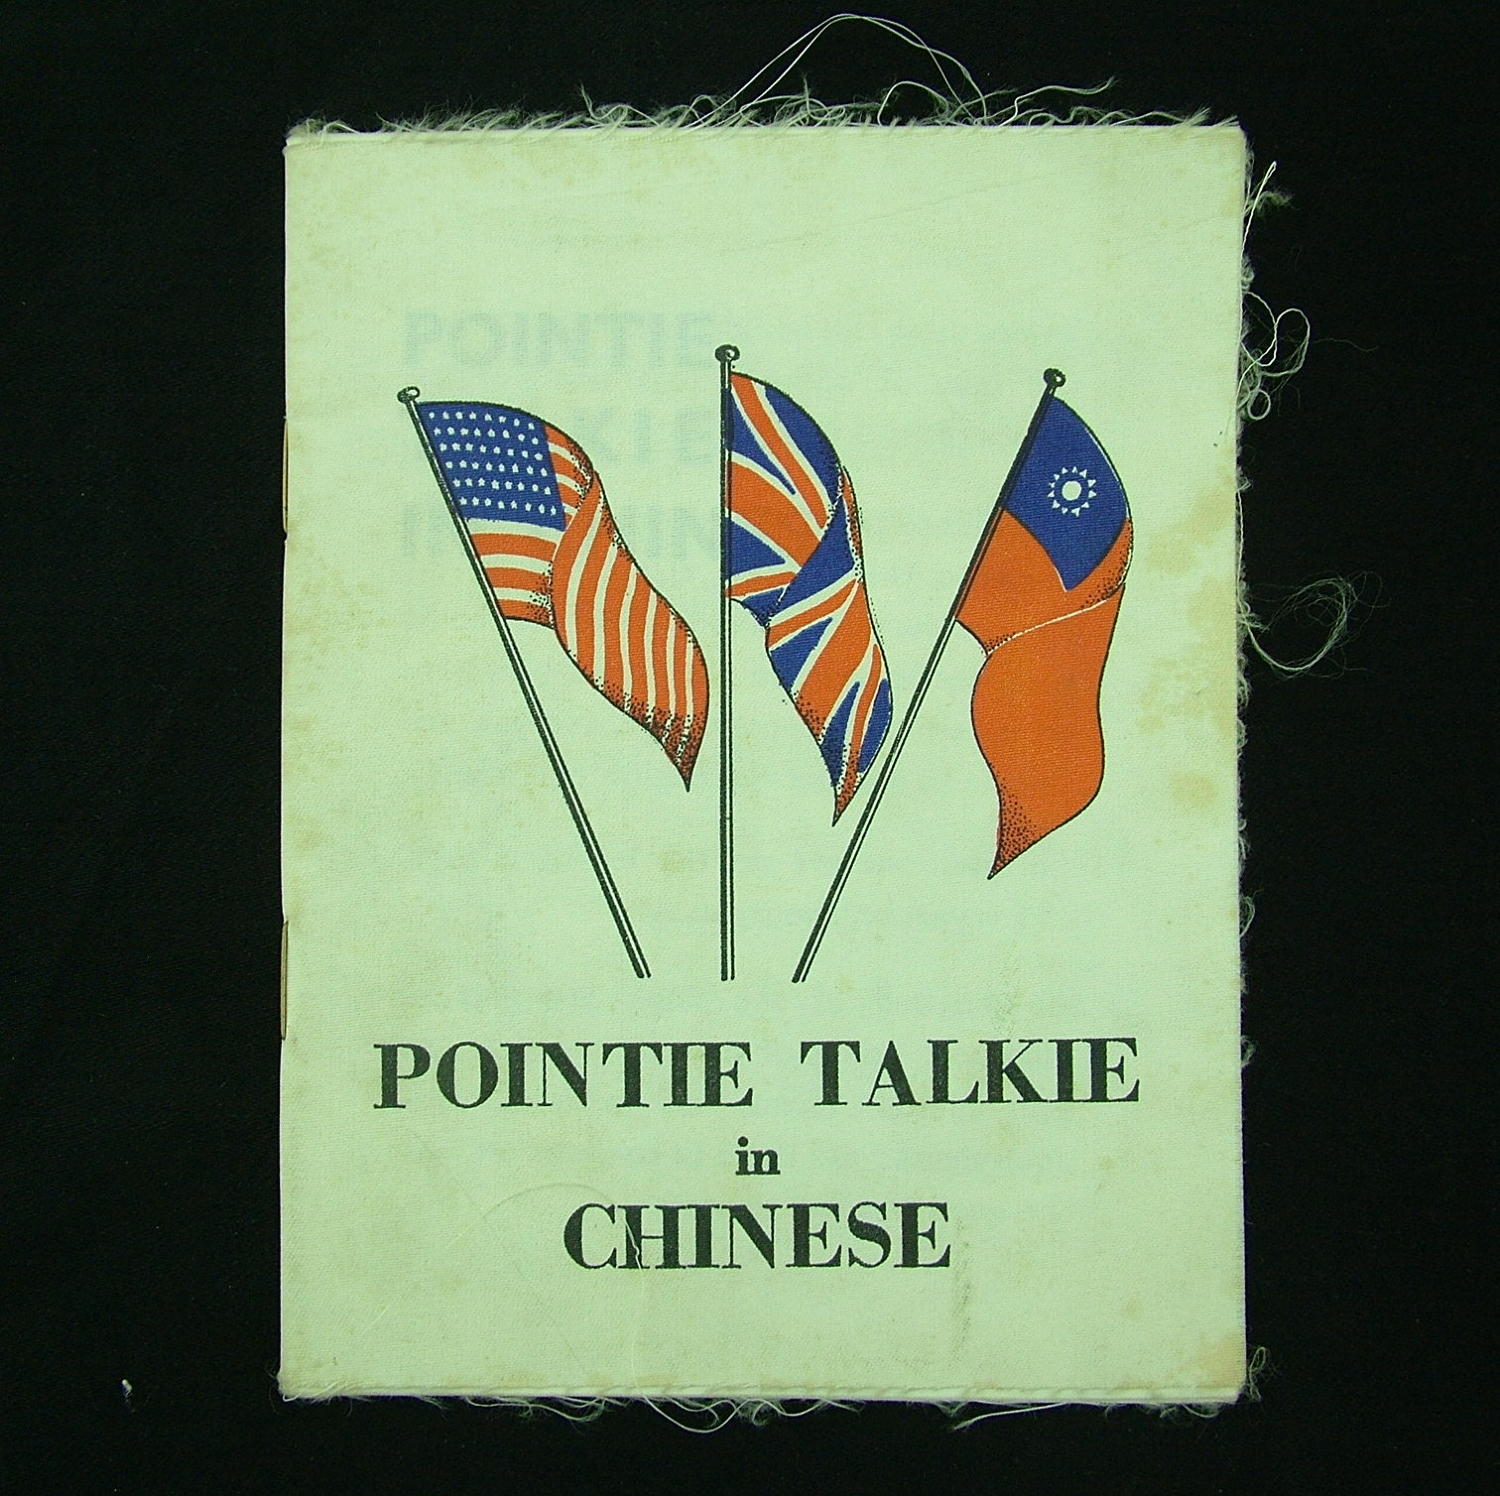 RAF issued Pointie Talkie in Chinese